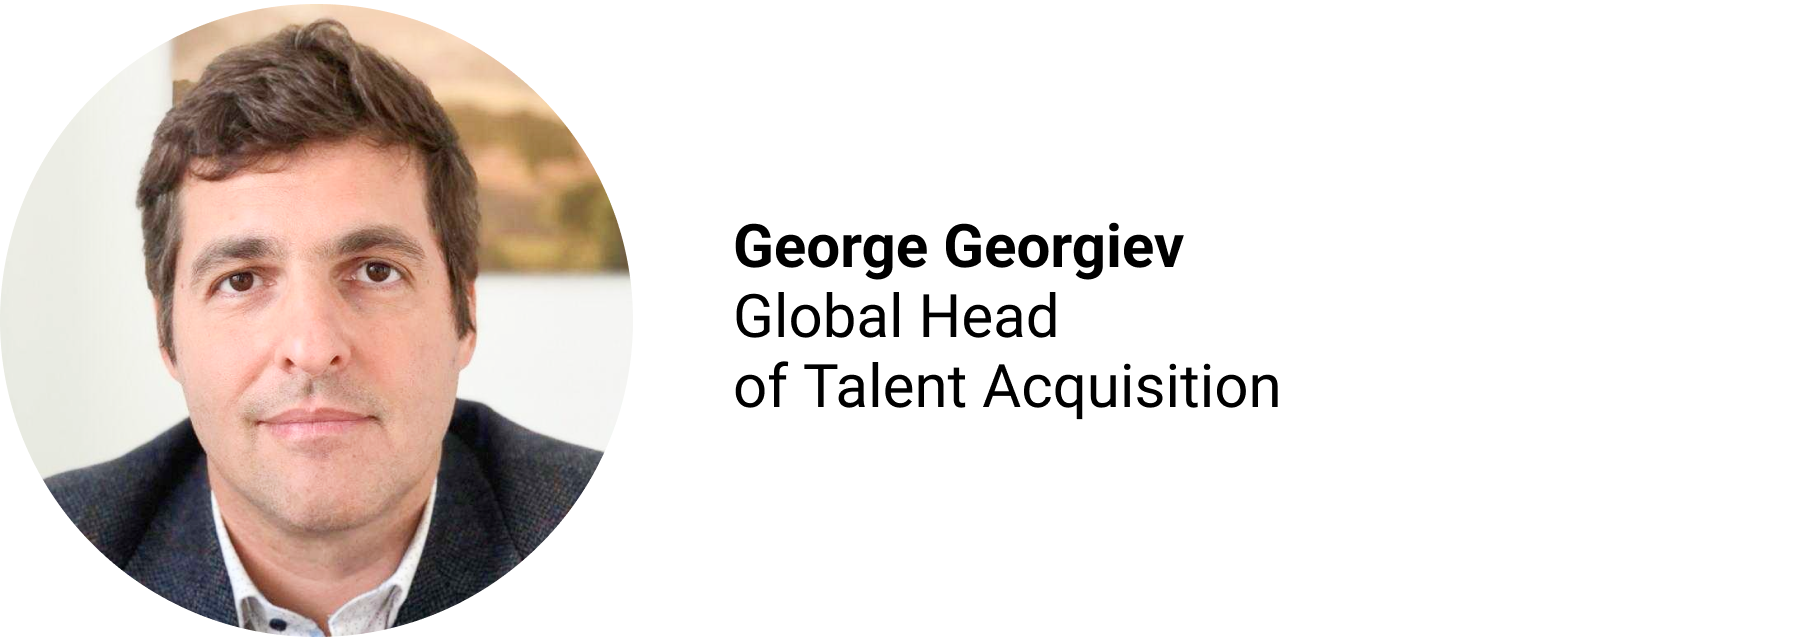 George Georgiev Exness Global Head of Talent Acquisition